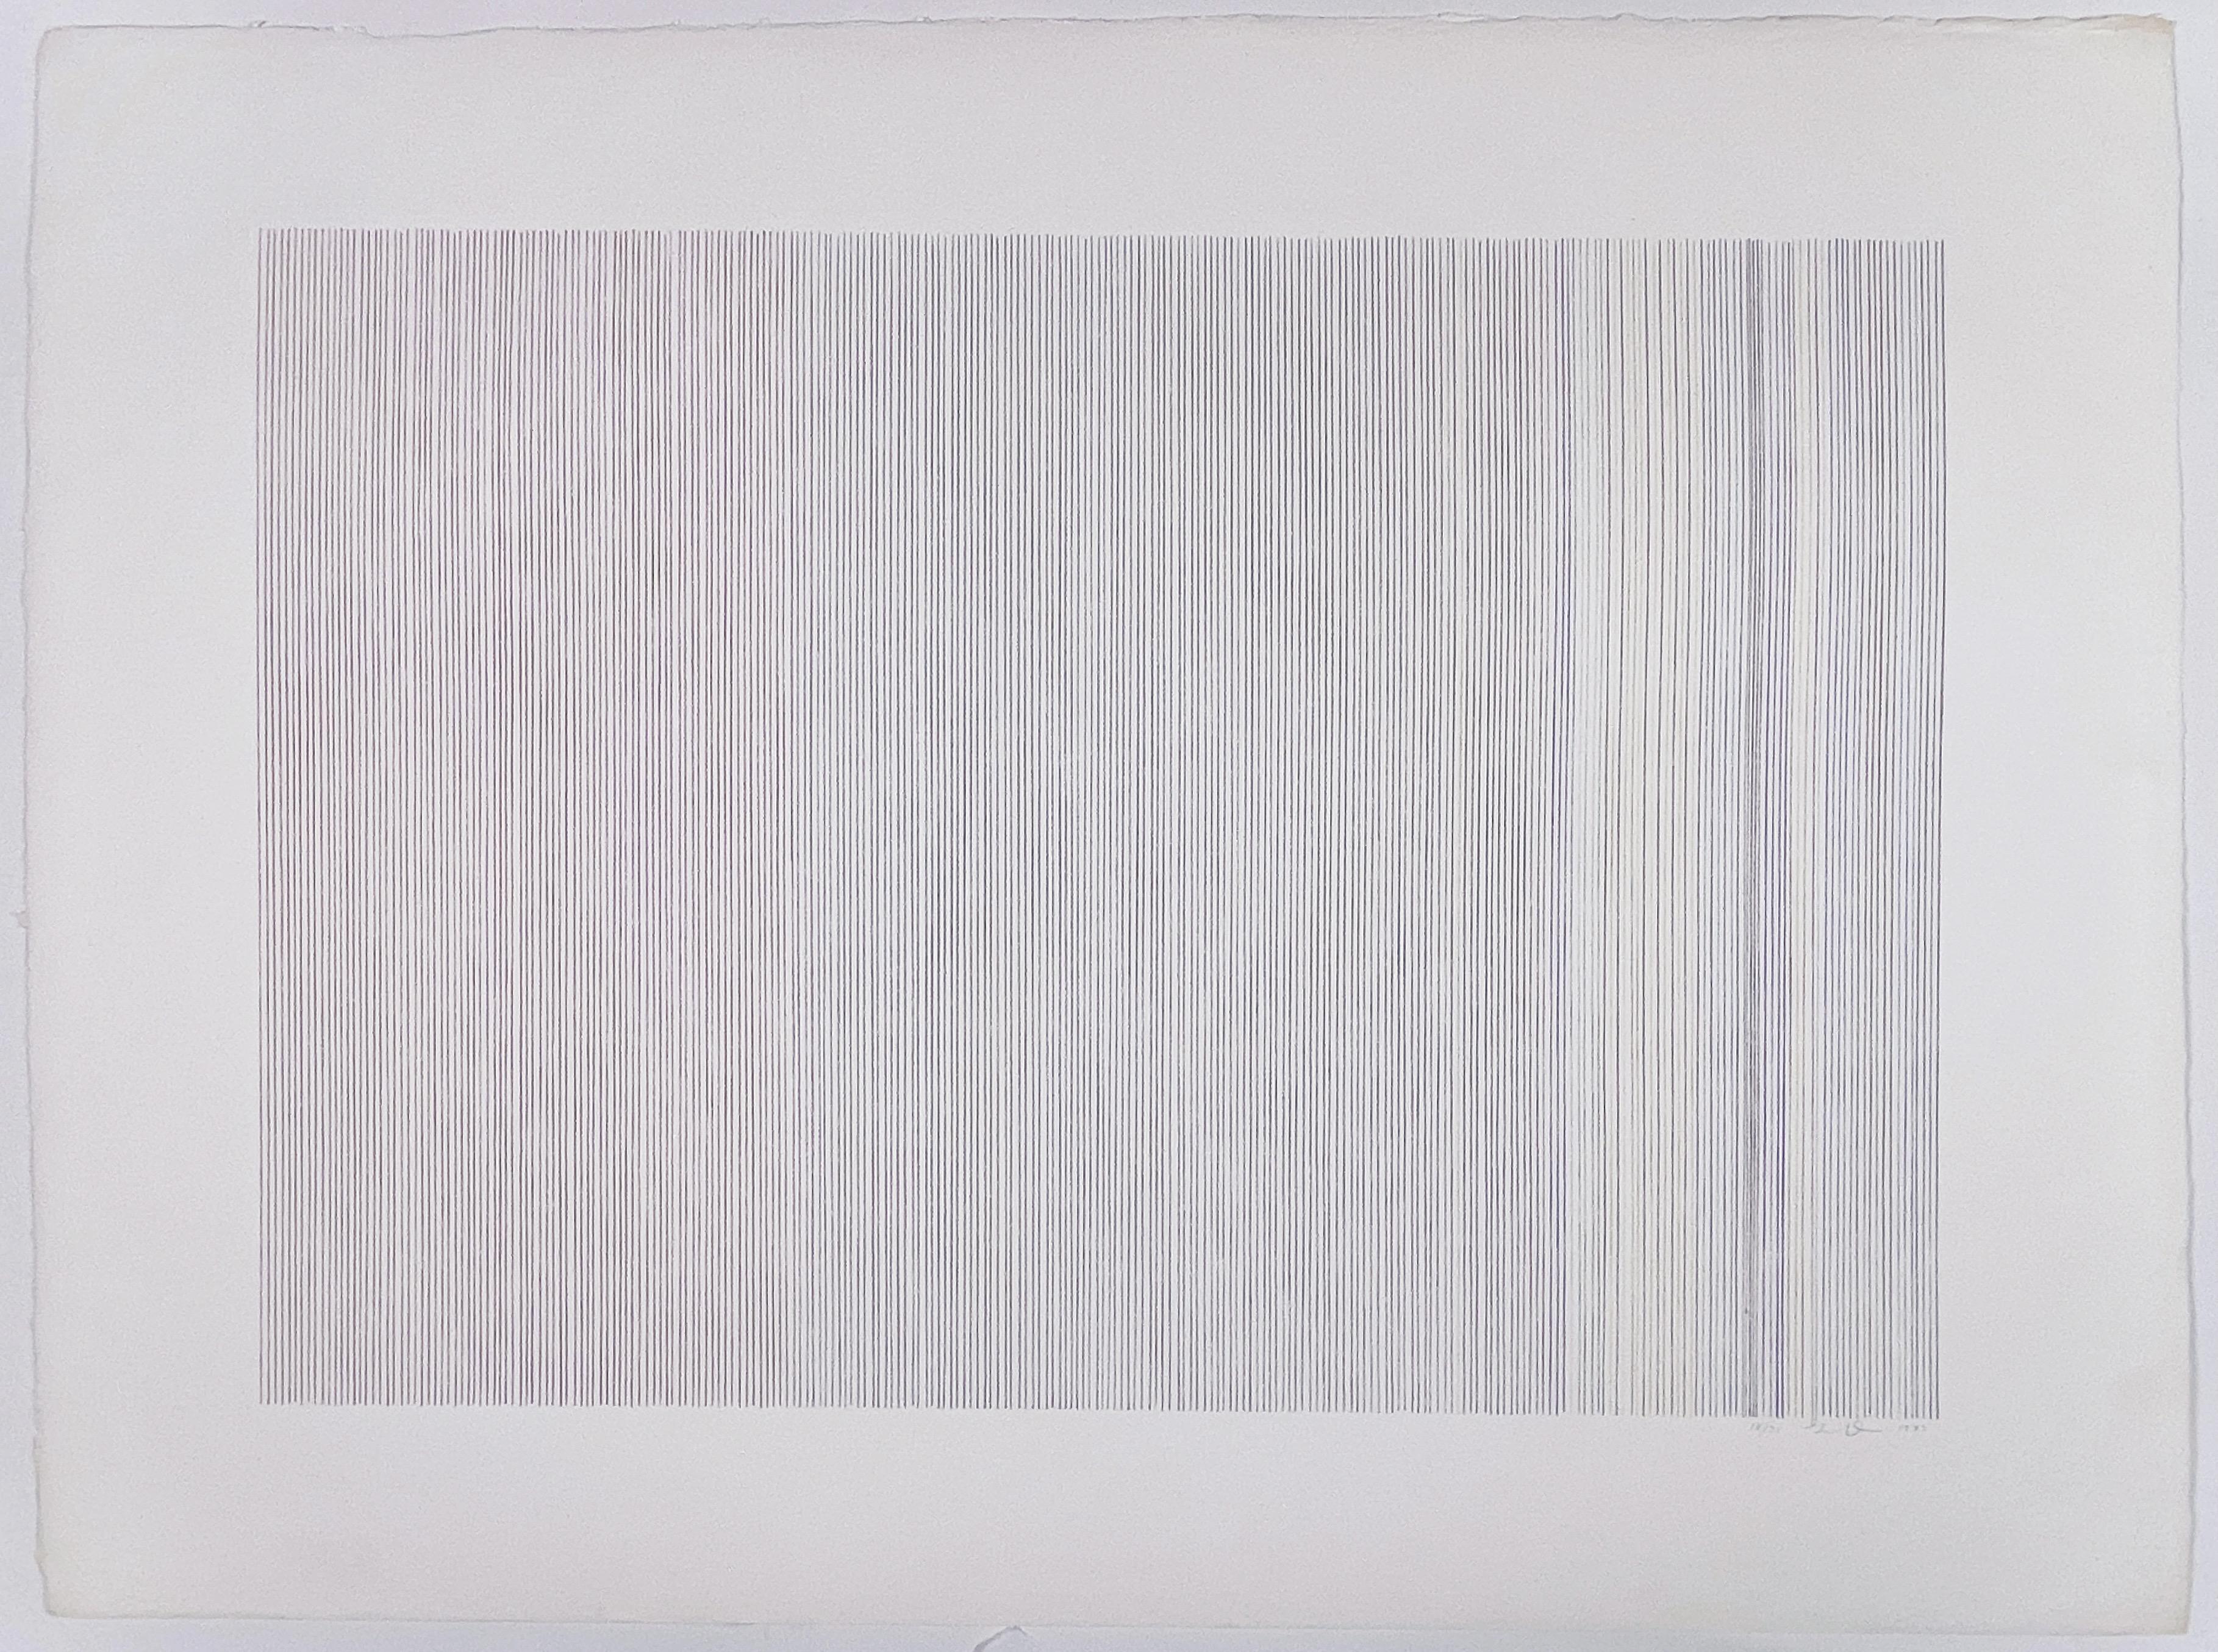 Vertical lines in muted colors take on the organic quality of handmade paper, resulting in this subtle iteration of Gene Davis’ iconic color field stripe paintings. The title "Narcissus" refers to the Greek myth of the son of the river god